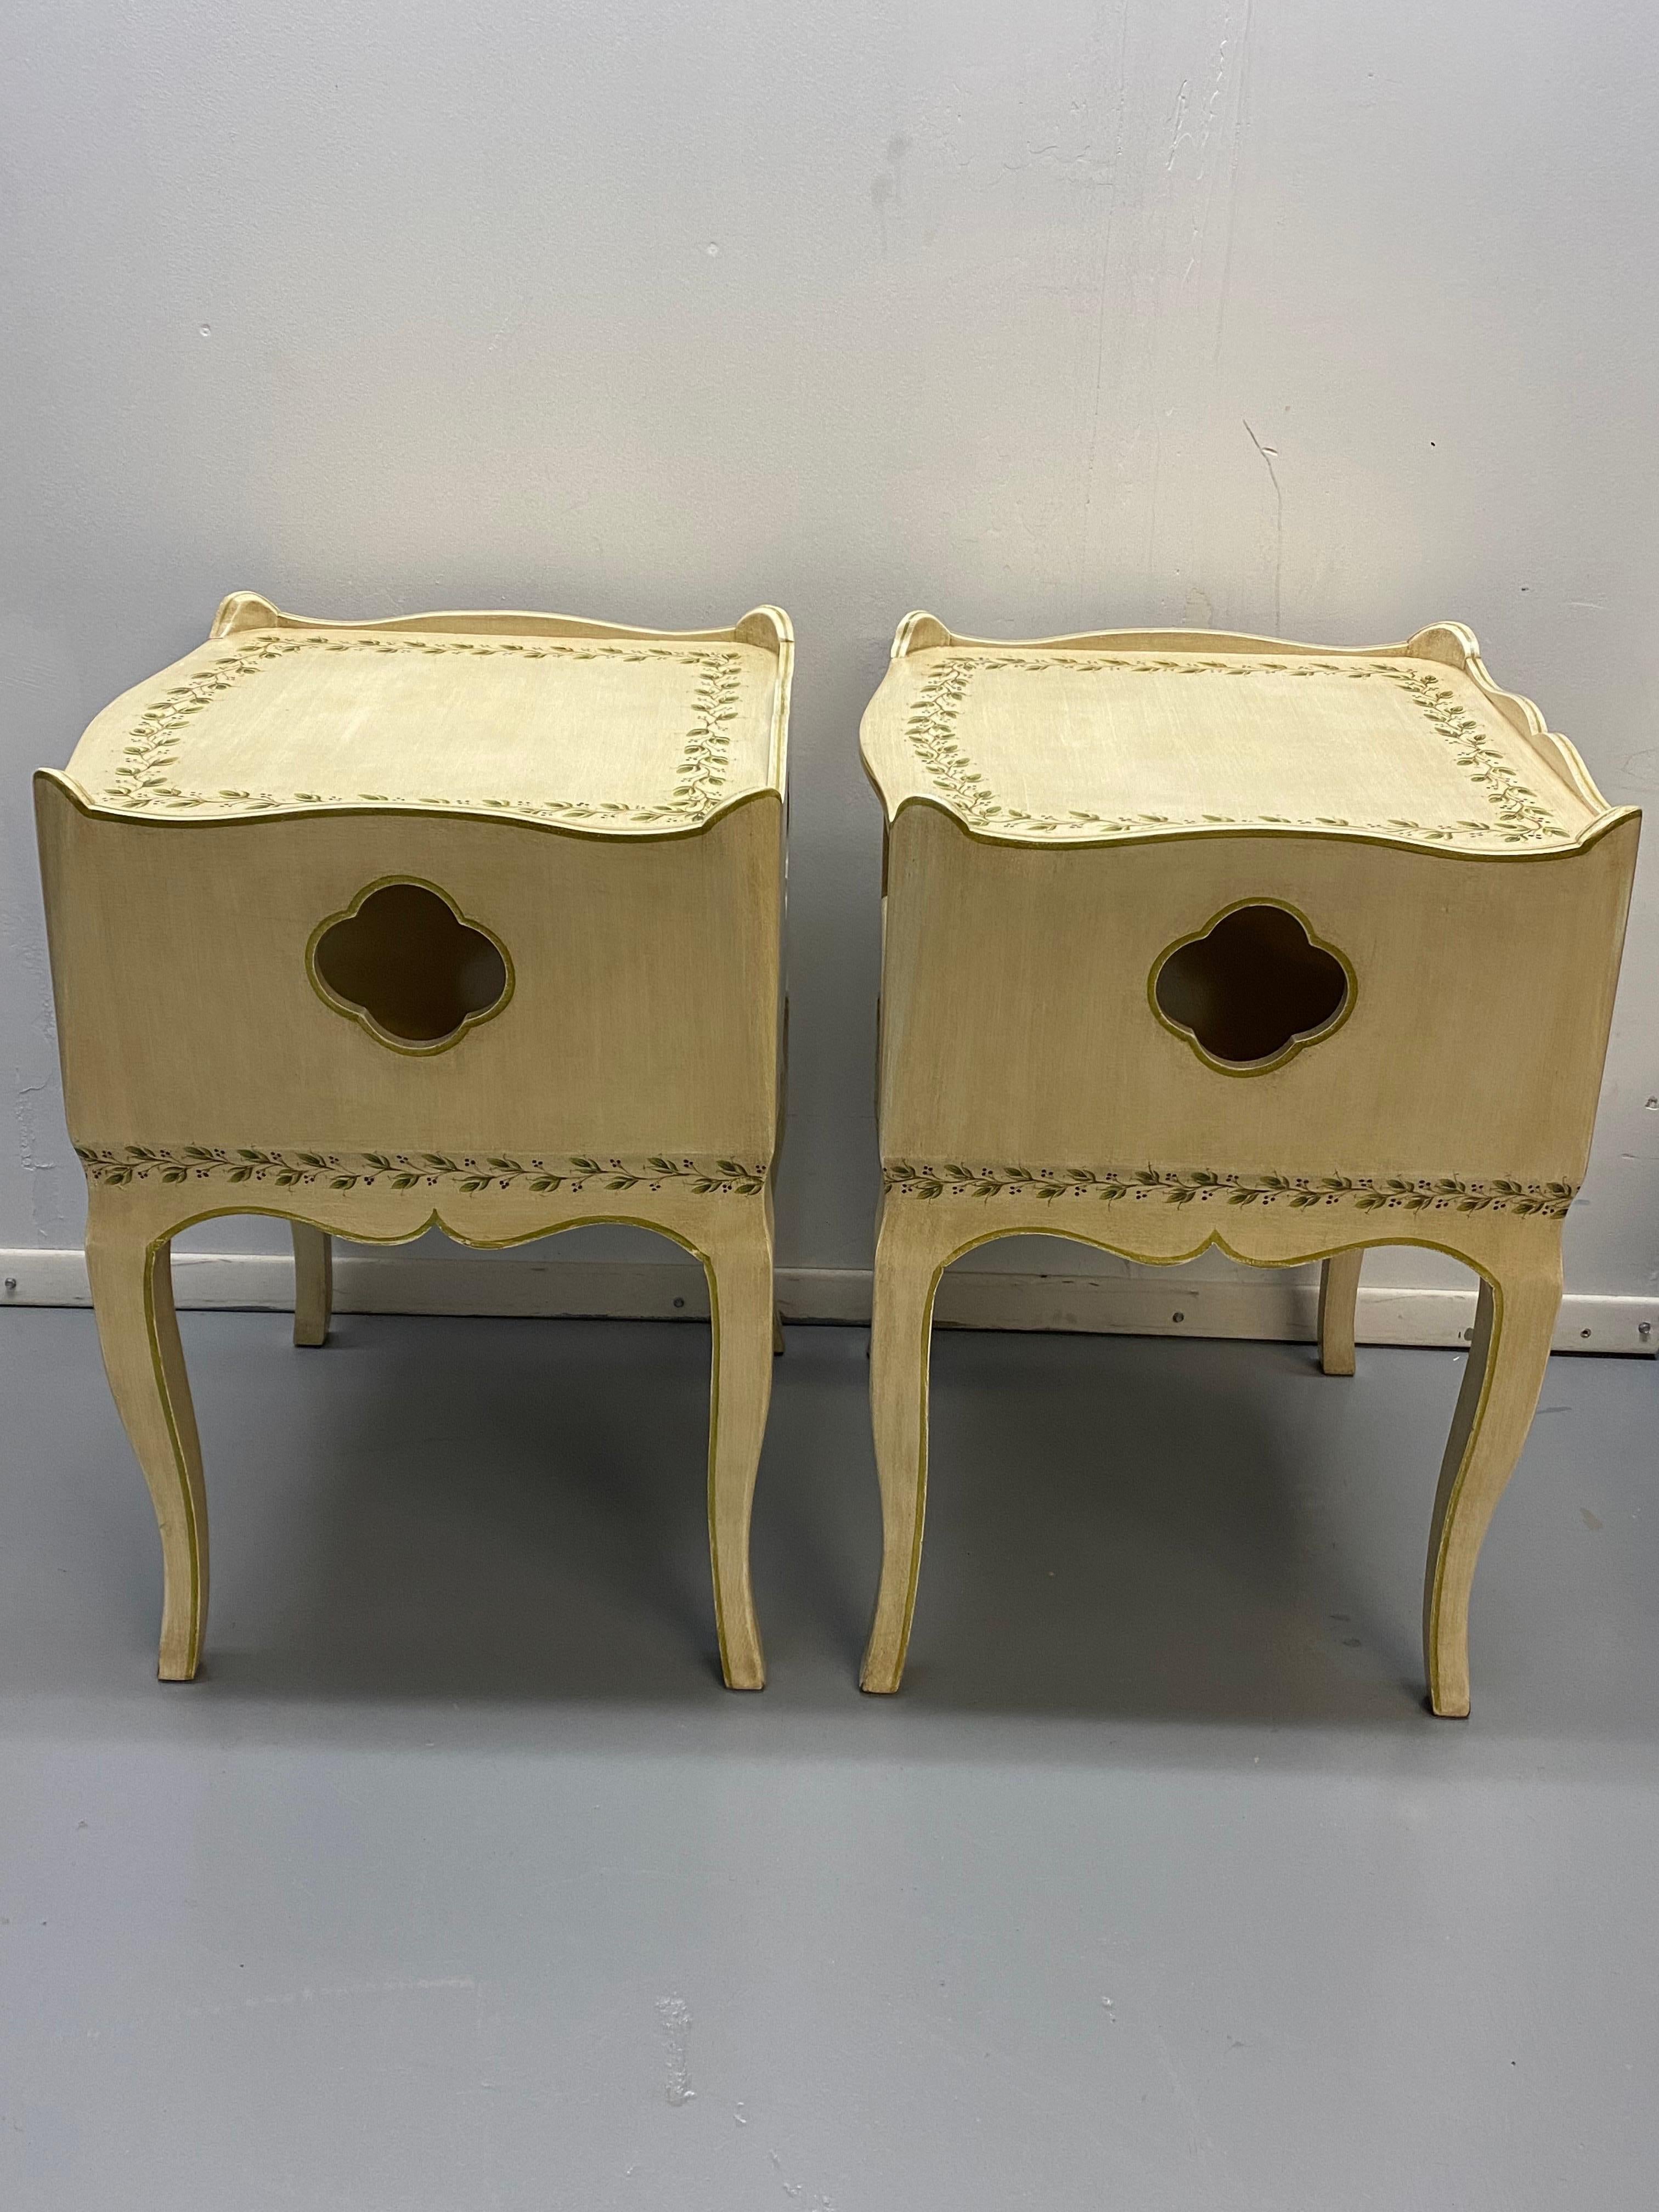 Pair of Painted Louis XV Style Night Stands with Leaf Decoration
Custom made nightstands with an open shelf and a dished top, clover cut out windows on three sides and hand painted leaf and berry decoration. Artist signature underside,